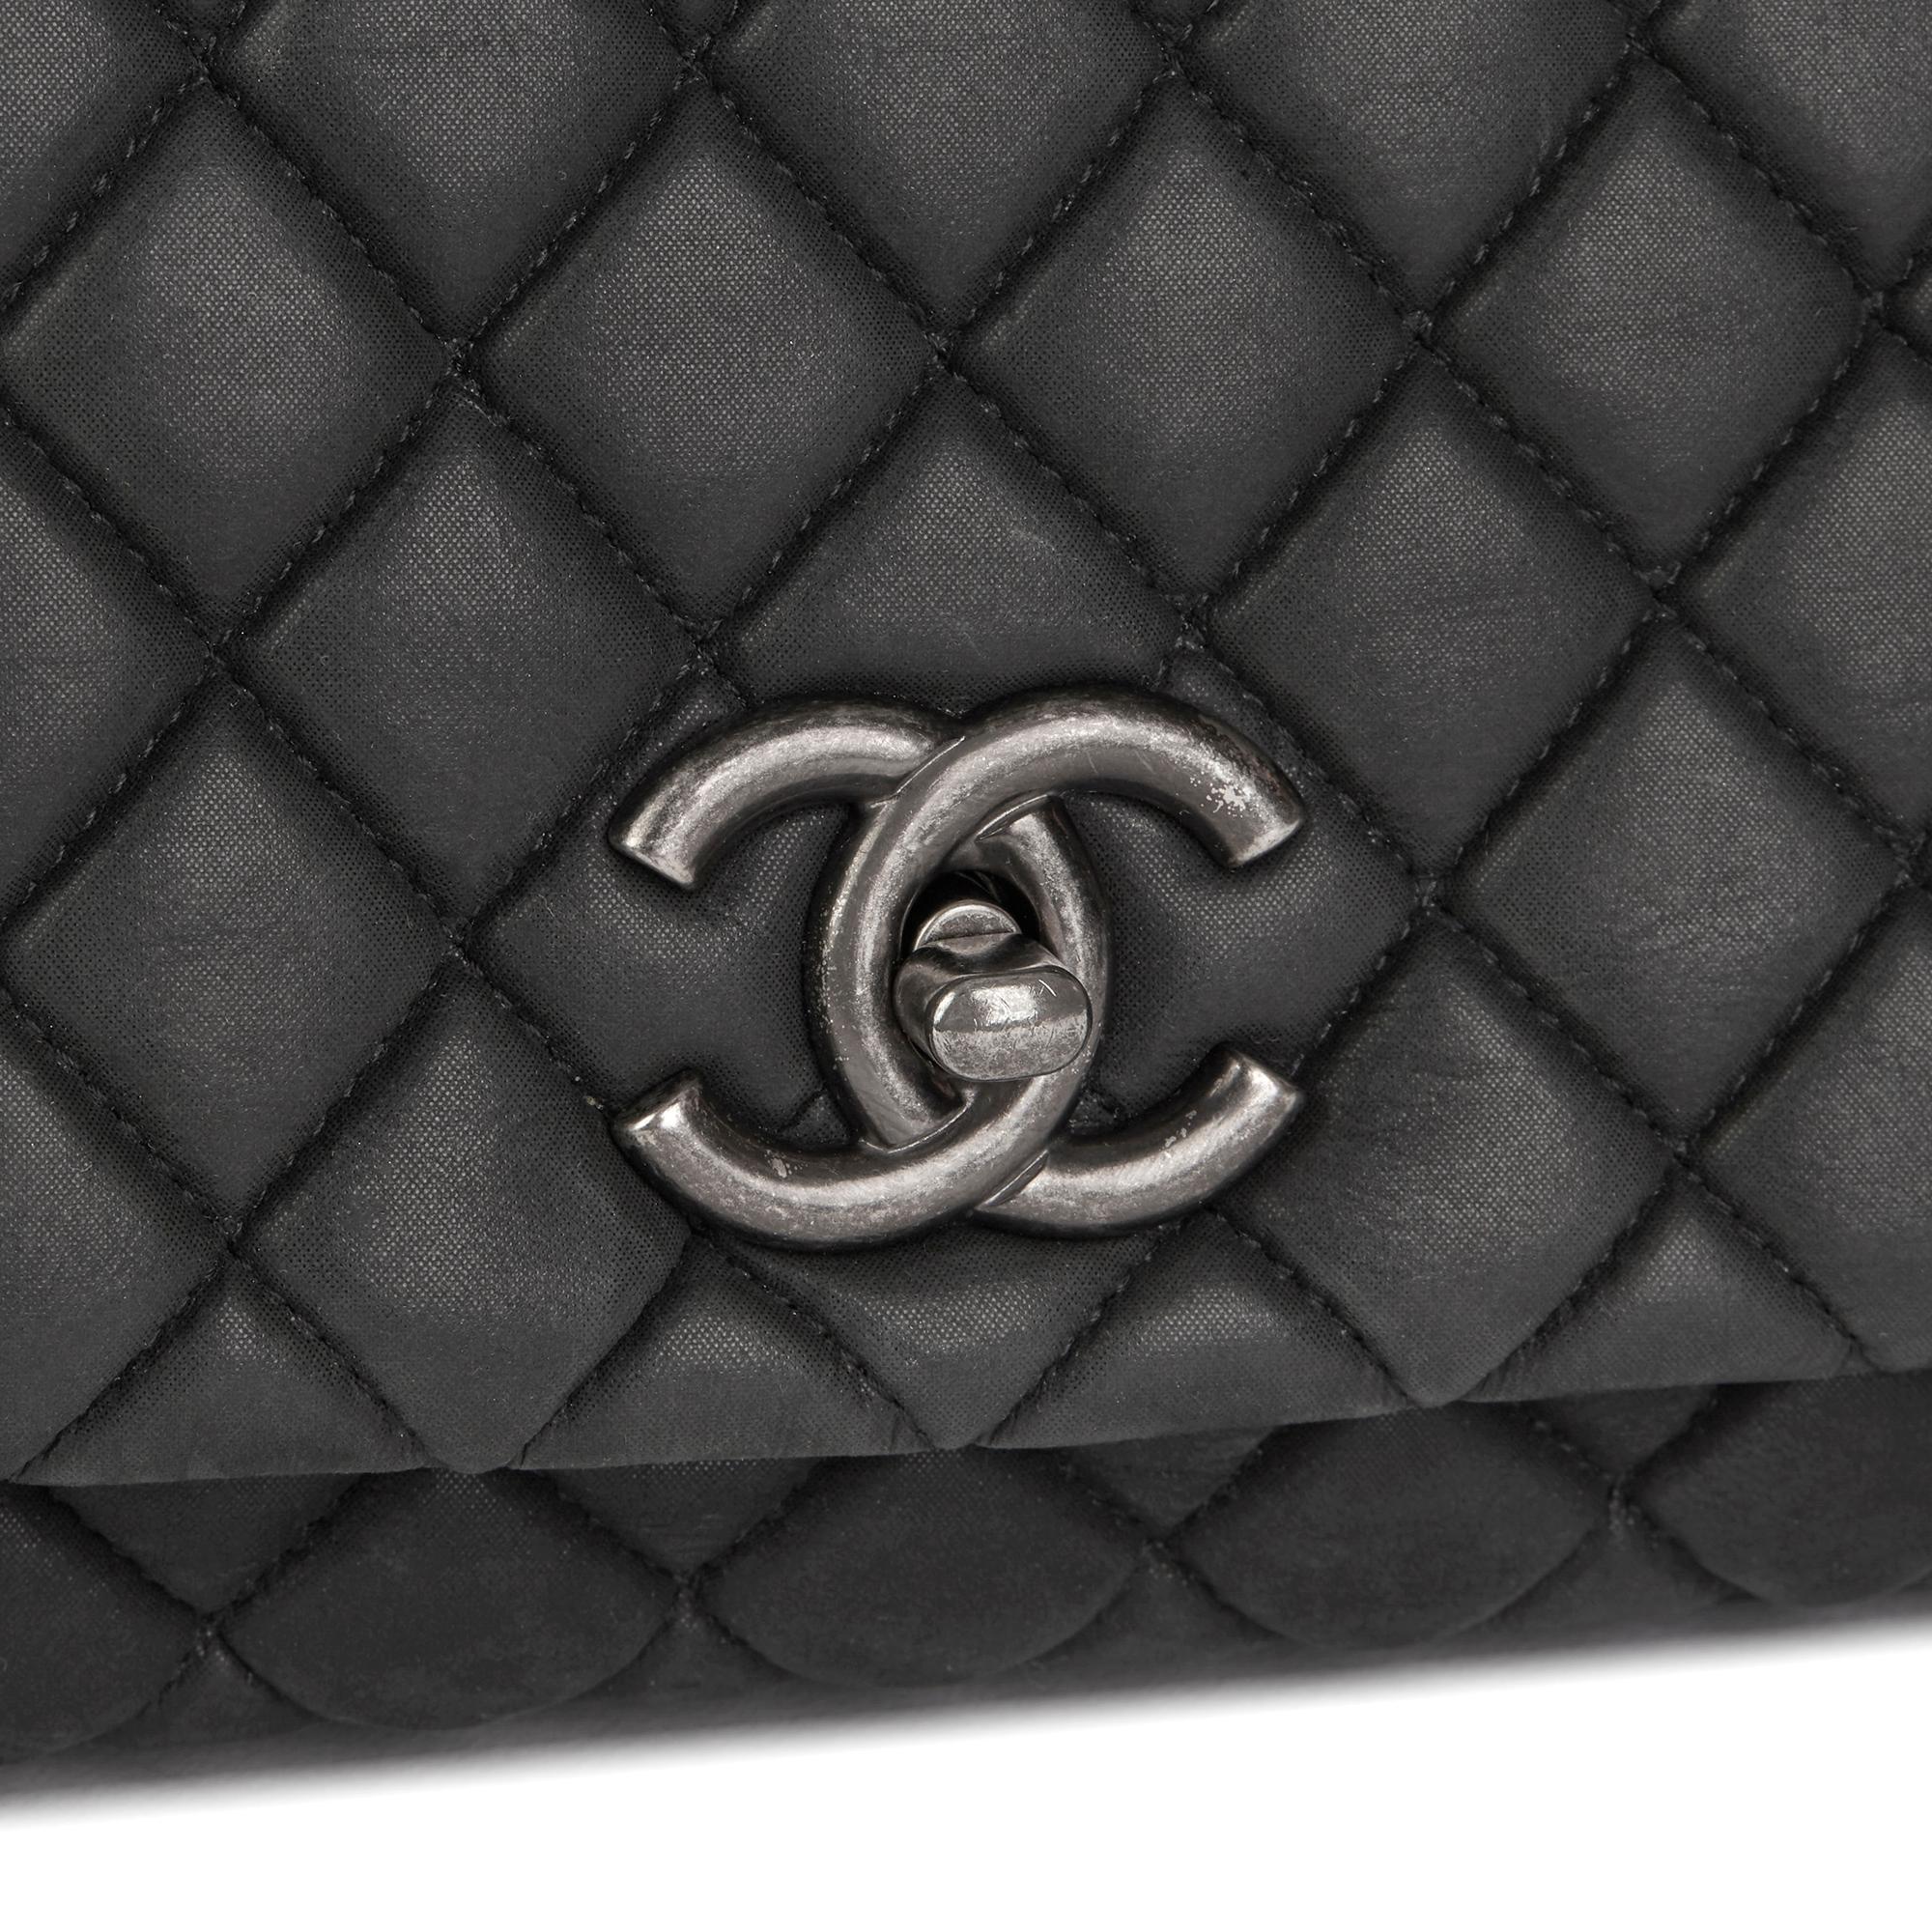 2013 Chanel Dark Grey Bubble Quilted Velvet Calfskin Small Bubble Flap Bag 1